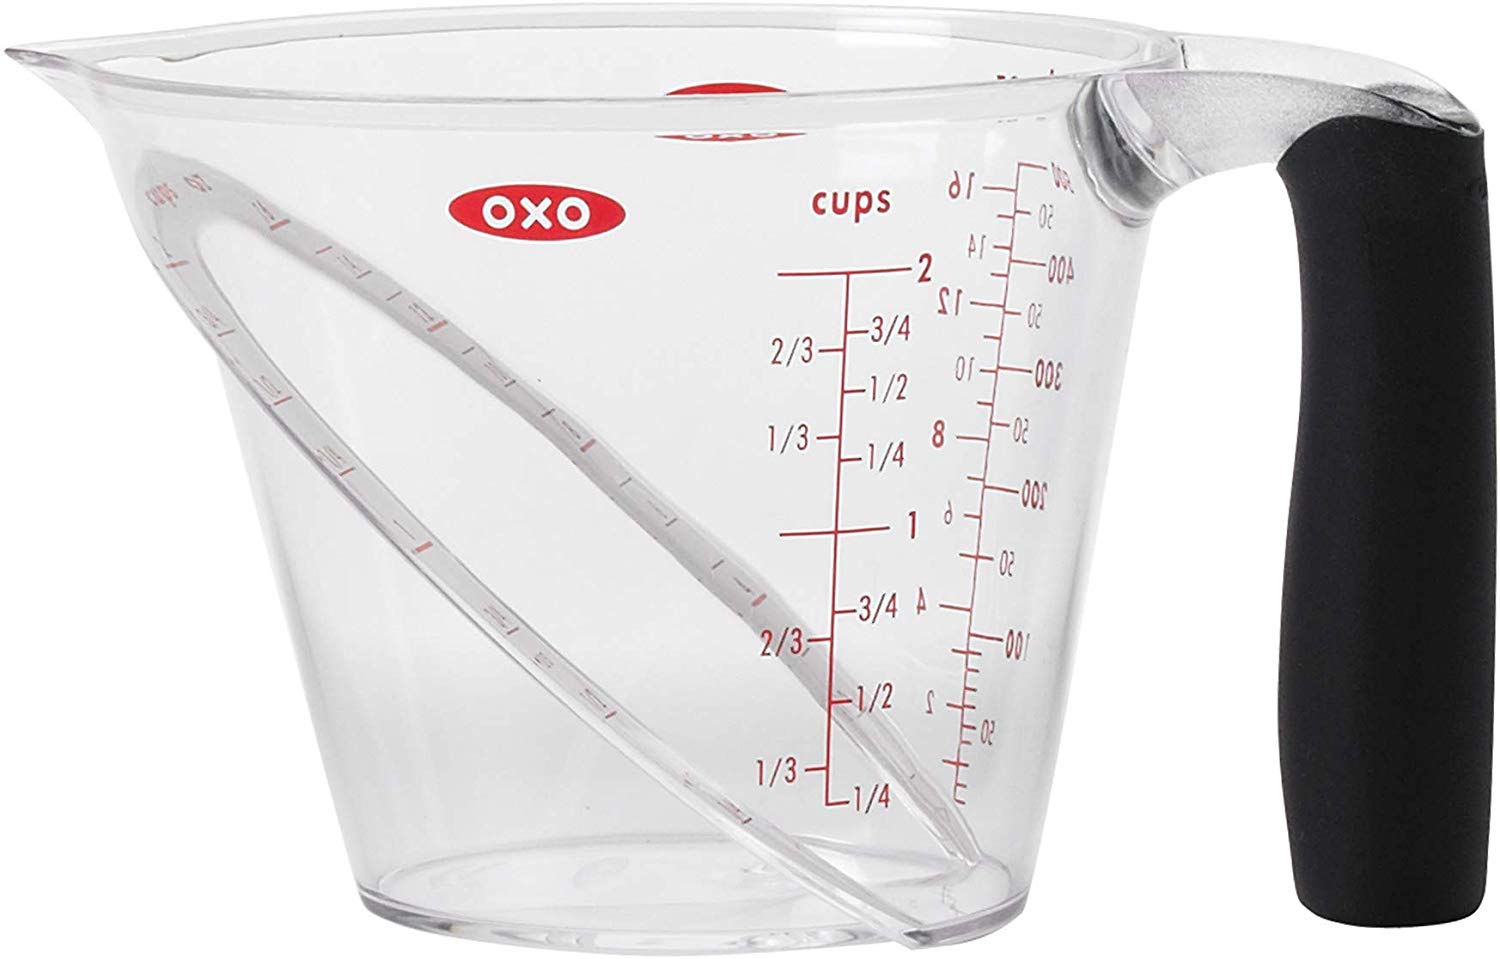 OXO 2-Cup Measuring Cup